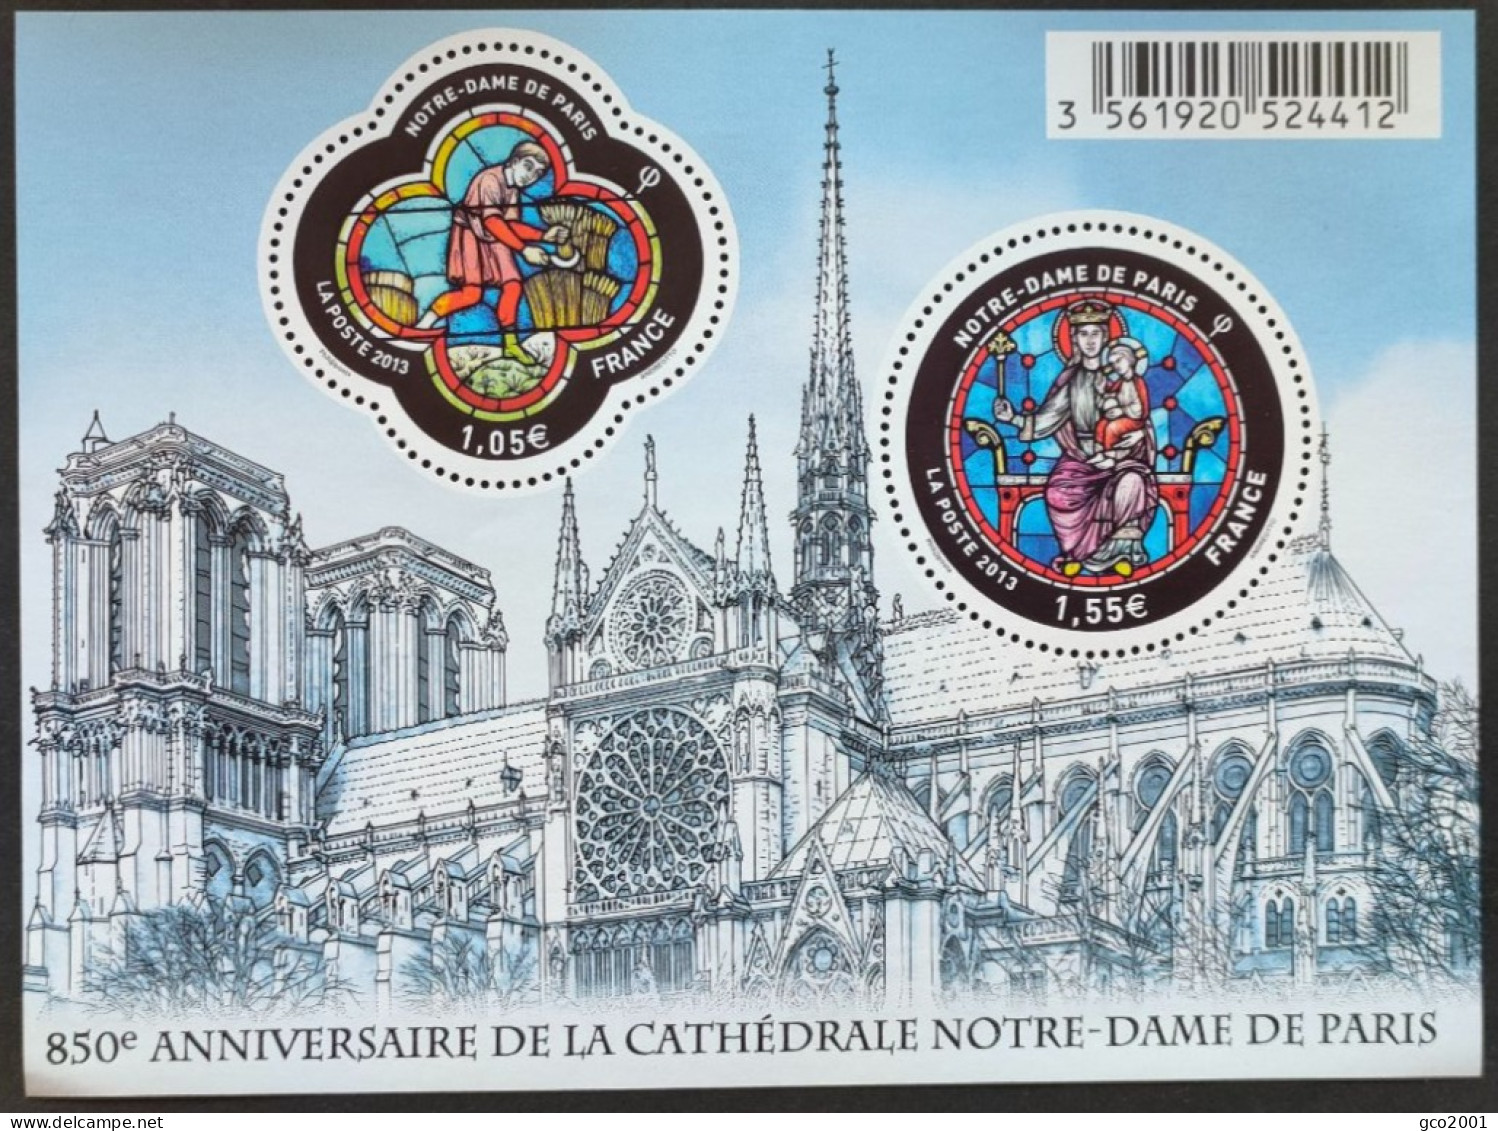 FRANCE / YT F4714 / NOTRE DAME DE PARIS - VITRAIL - CATHEDRALE / NEUF ** / MNH - 2008-2013 Marianne Of Beaujard